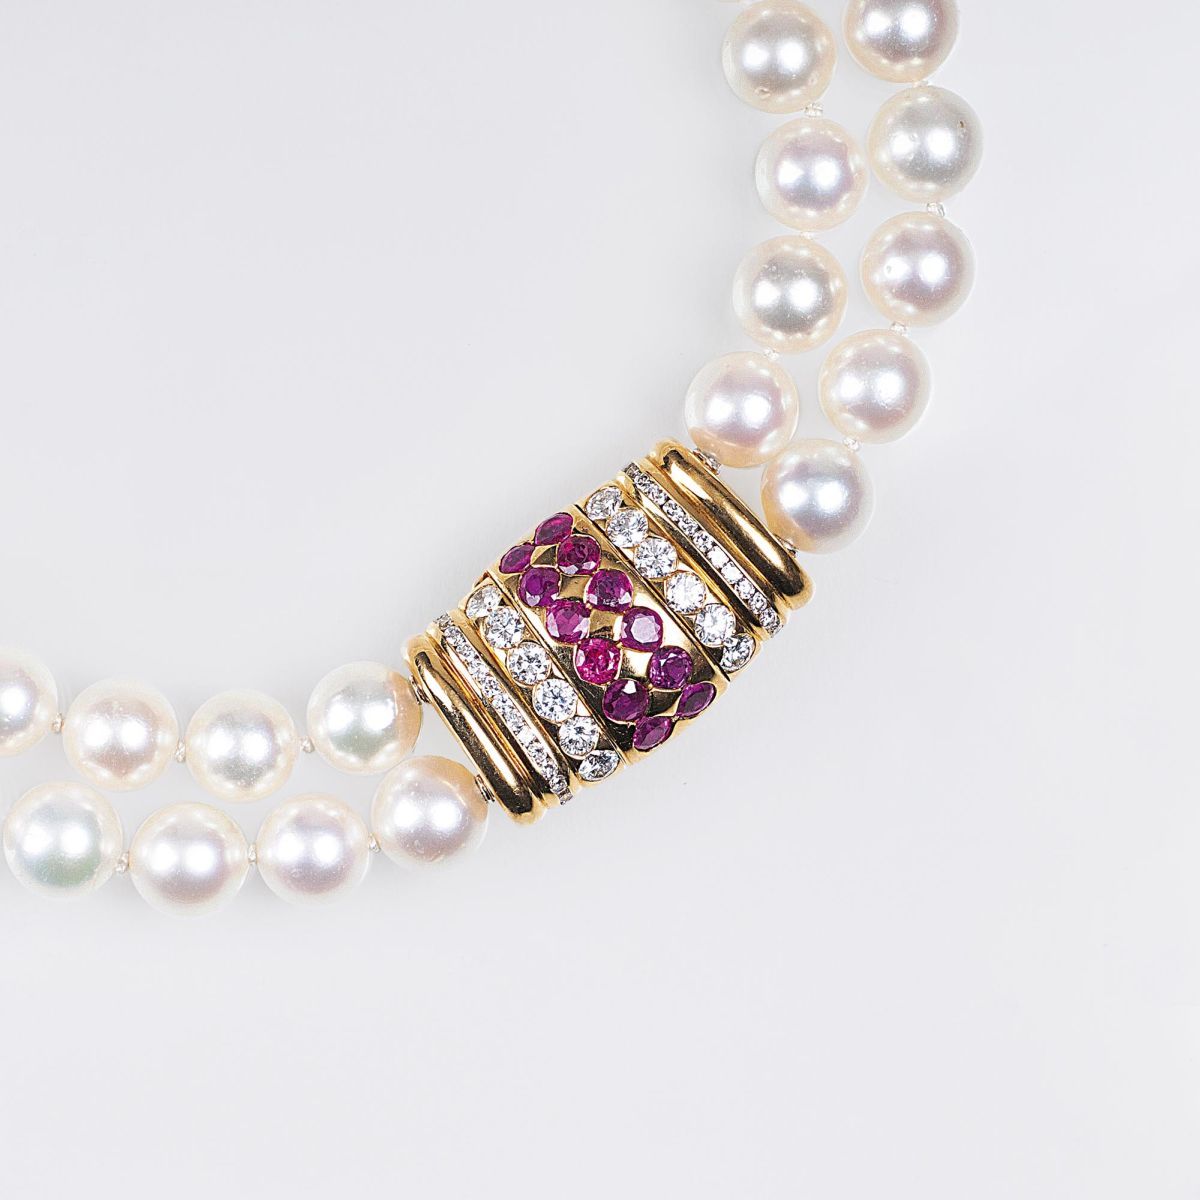 A Pearl Necklace with precious Ruby Diamond Clasp